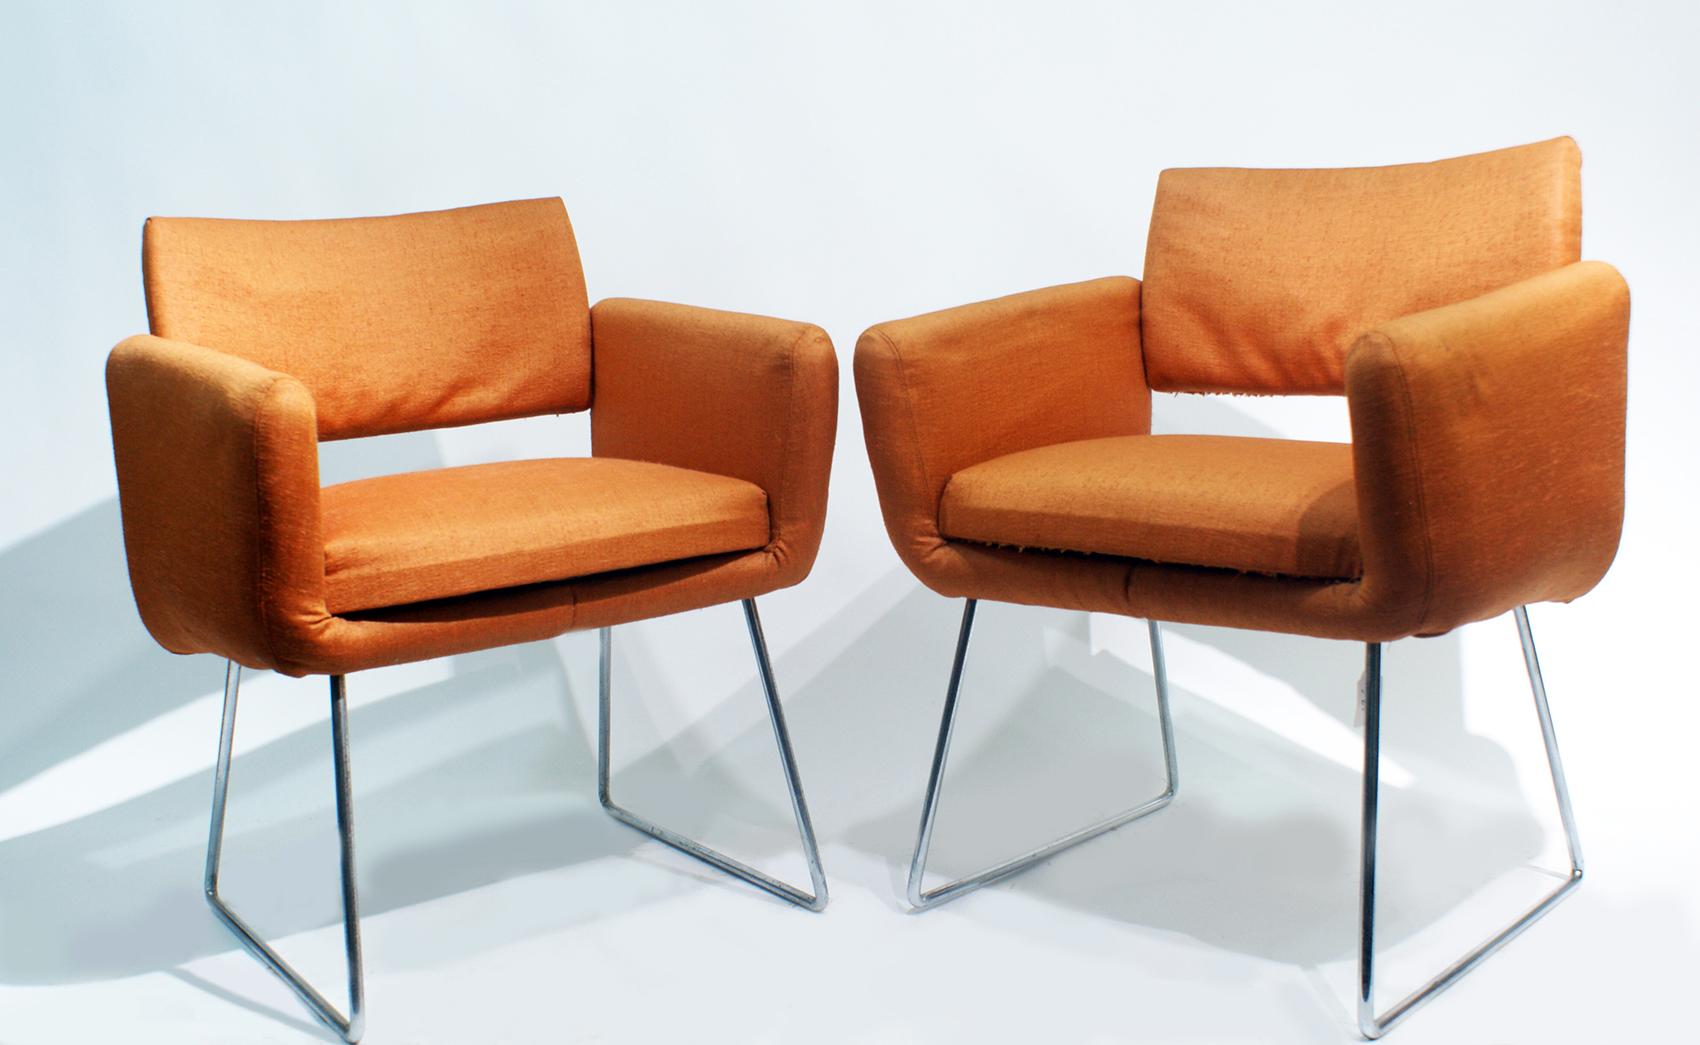 A beautiful pair of “760 chairs” designed by Joseph André Motte and manufactured by Steiner, France in 1957.
Editions Sieges Steiner.
The chair features polished stainless steel feet, and covered with fabric in orange color.
Joseph-André Motte (6